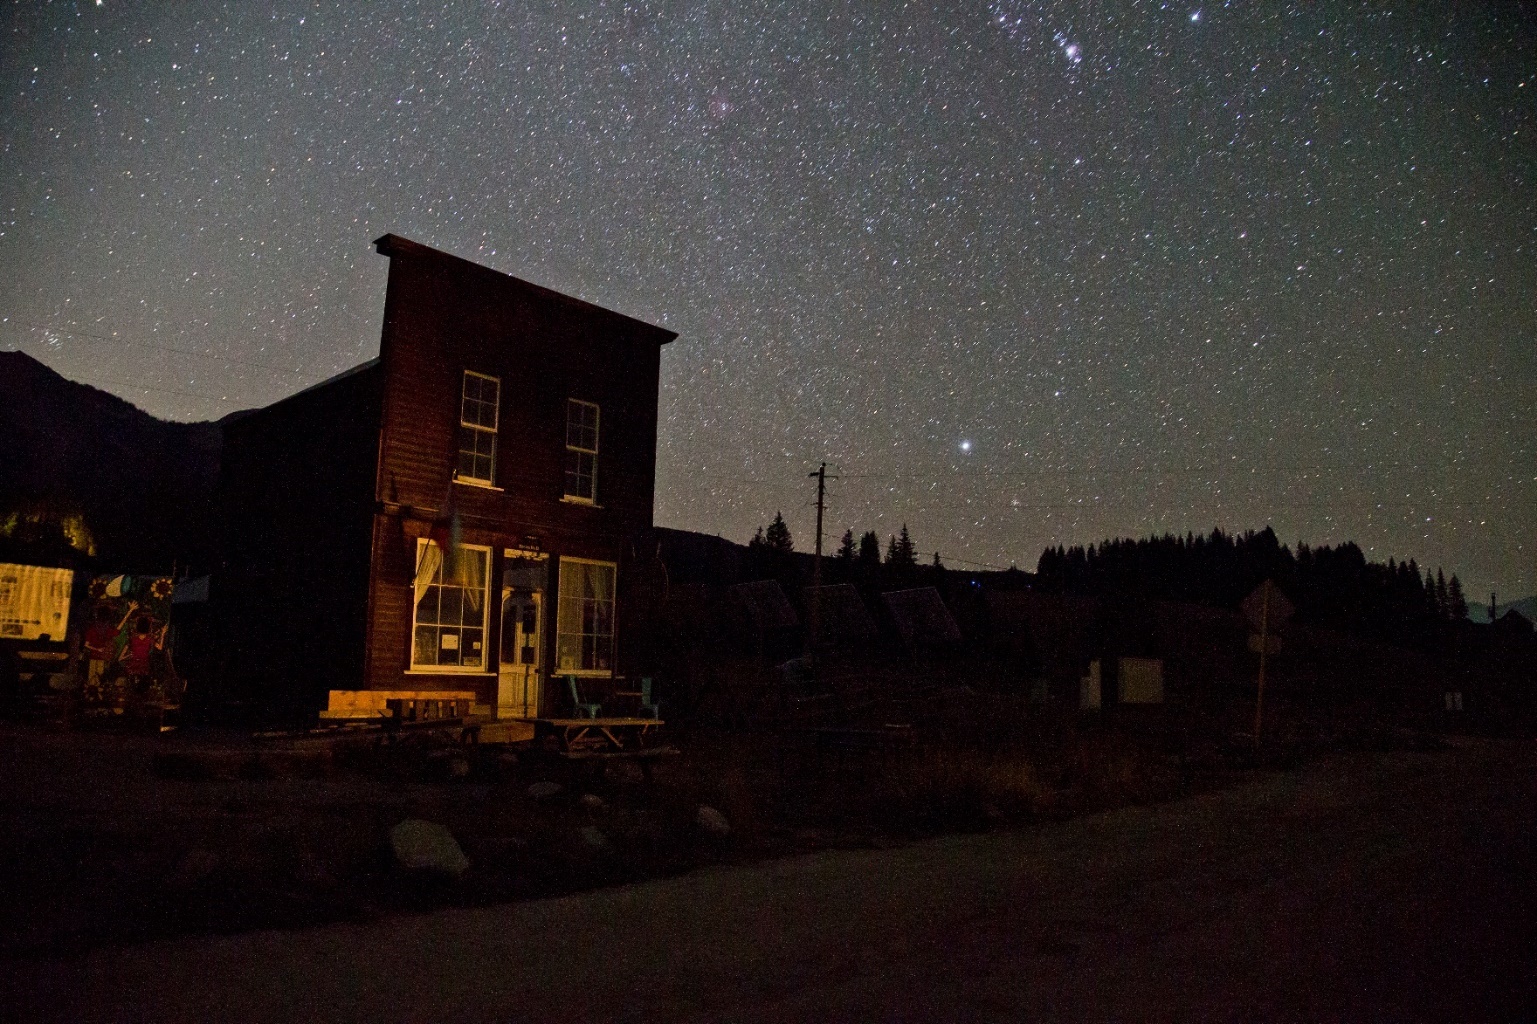 Stars fill the nighttime sky over buildings in Gothic, Colorado.